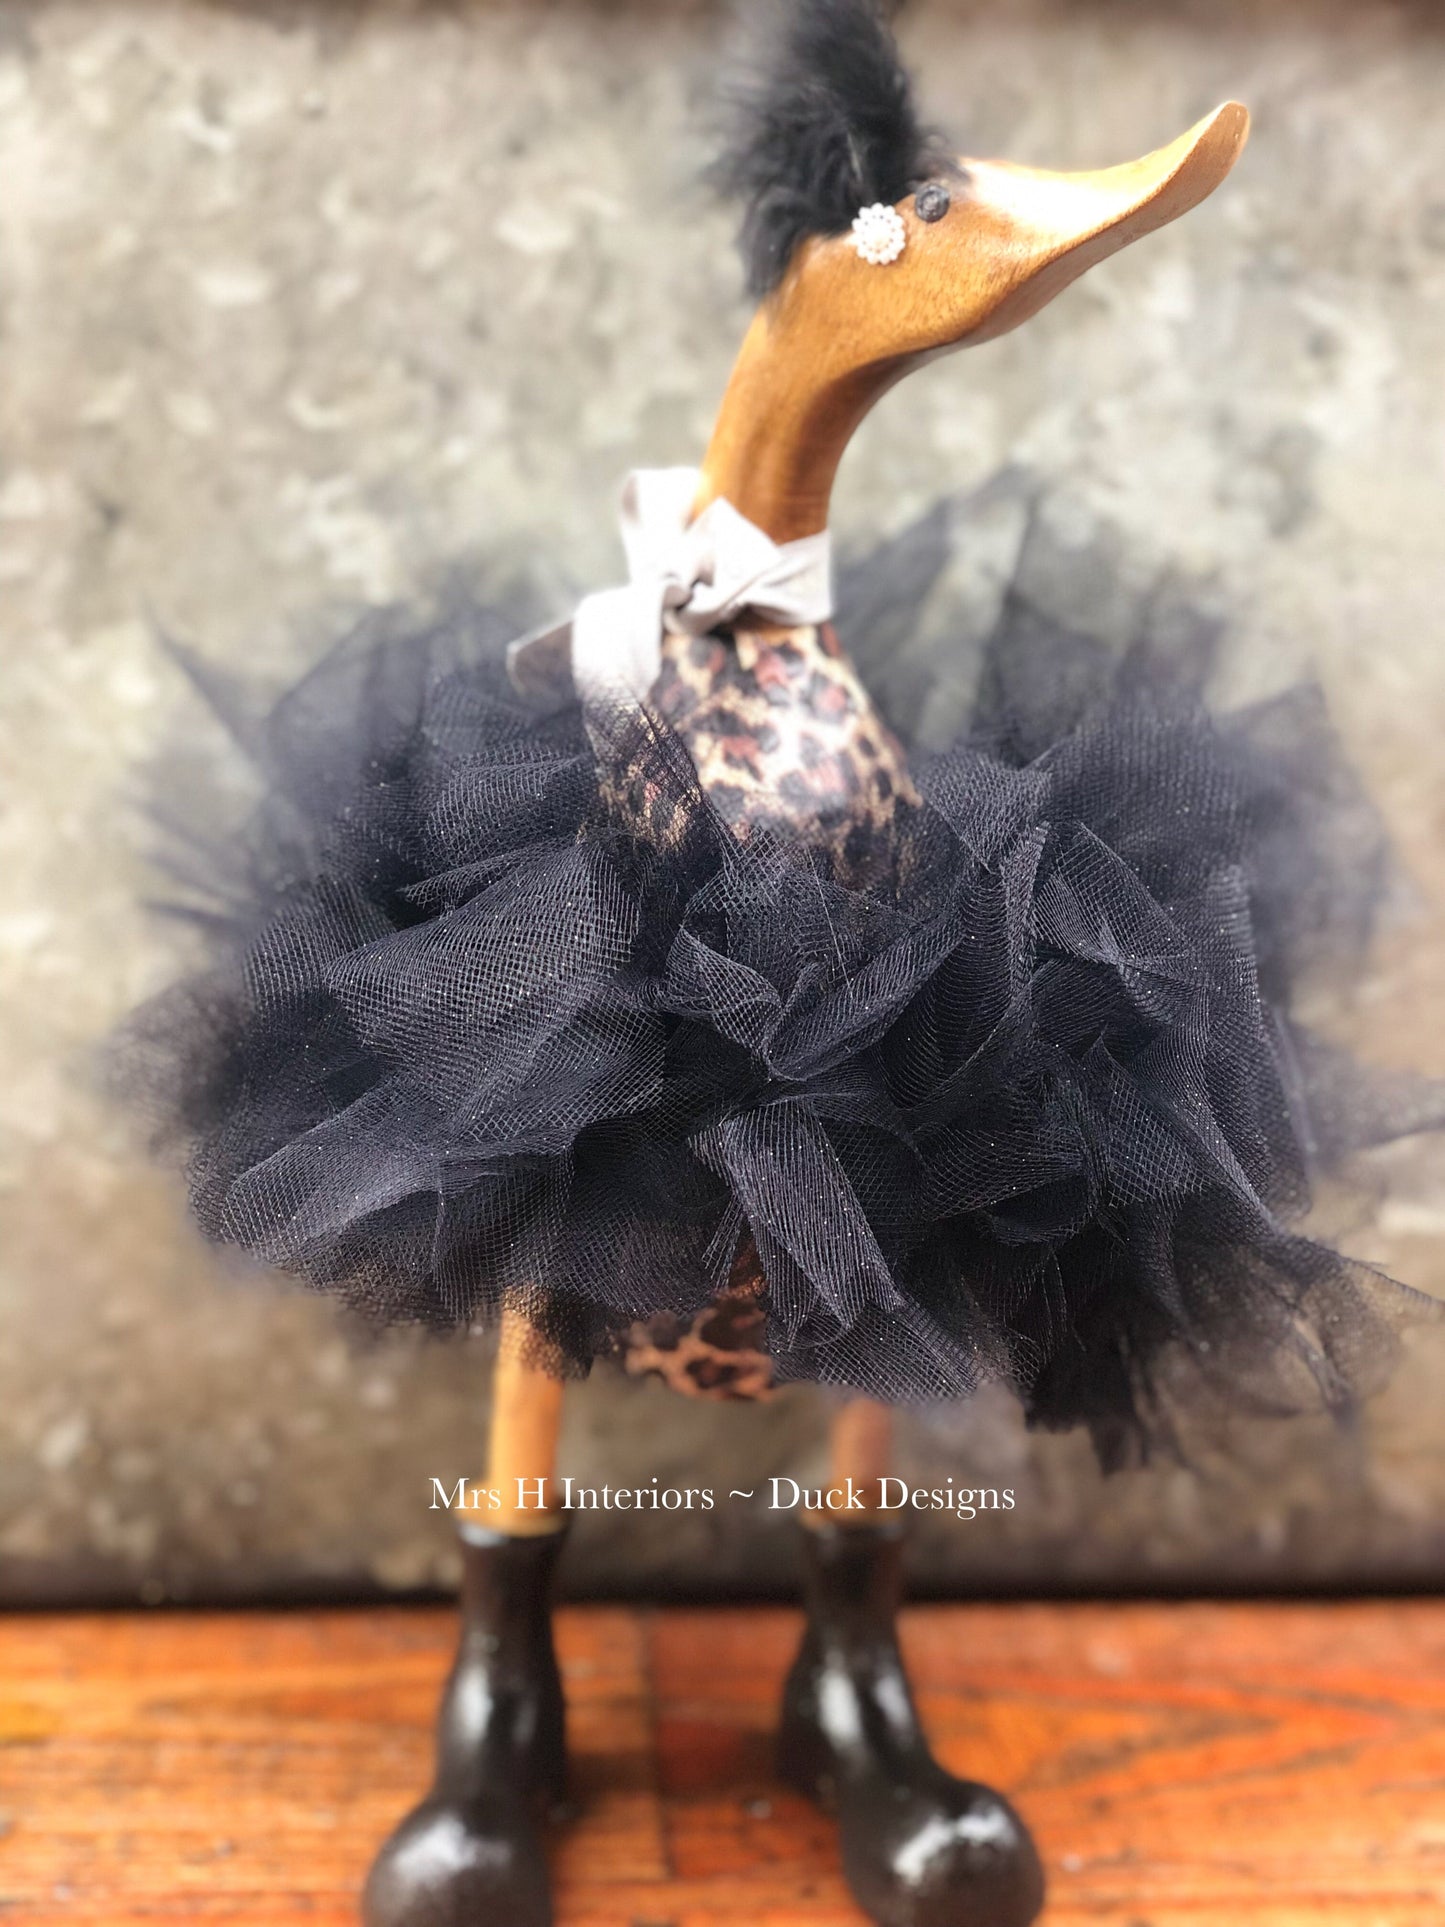 Foxy The Leopard Print Duck in Fur Cape - Decorated Wooden Duck in Boots by Mrs H the Duck Lady